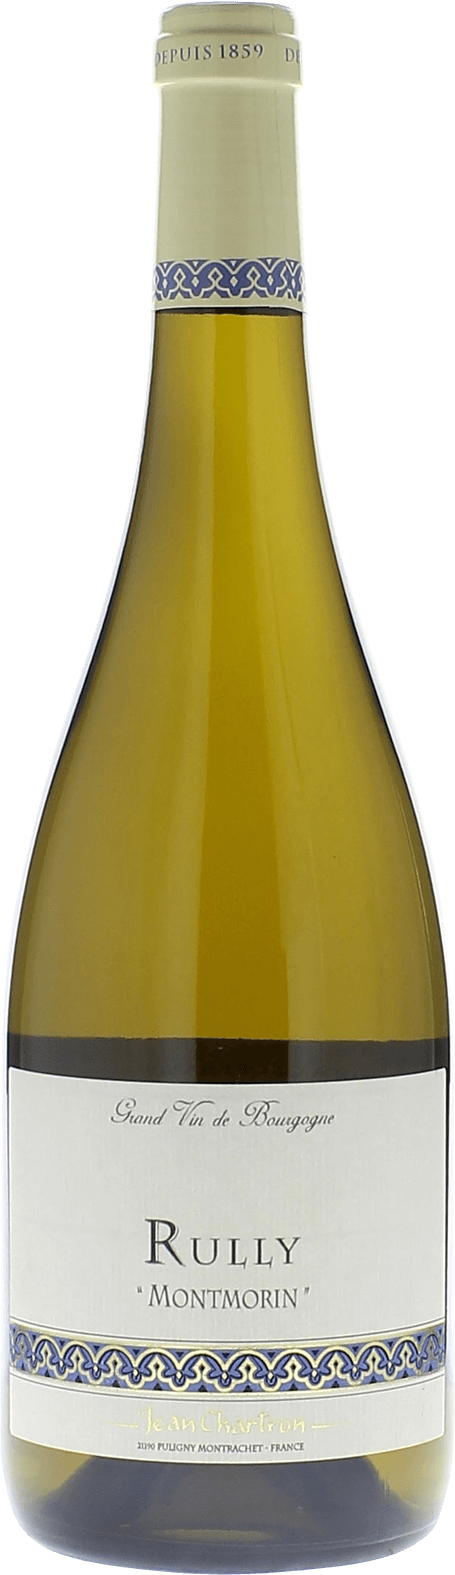 Rully montmorin 2017 Domaine CHARTRON Jean, Bourgogne blanc